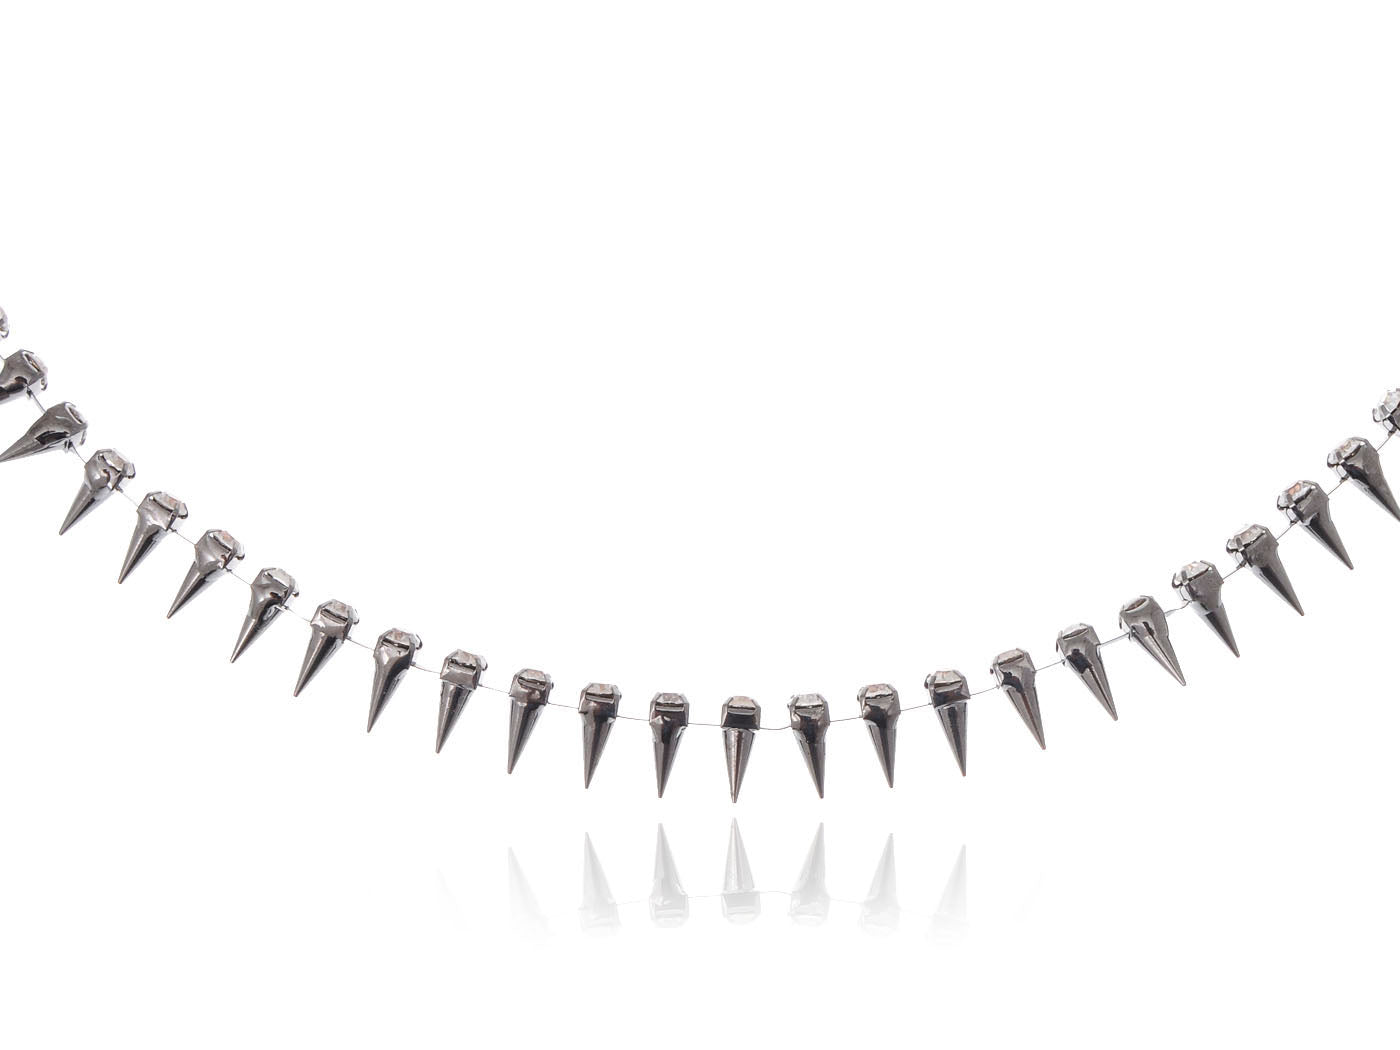 Emo Choker With Spikes Collar Man Leather Necklace Chain Jewelry